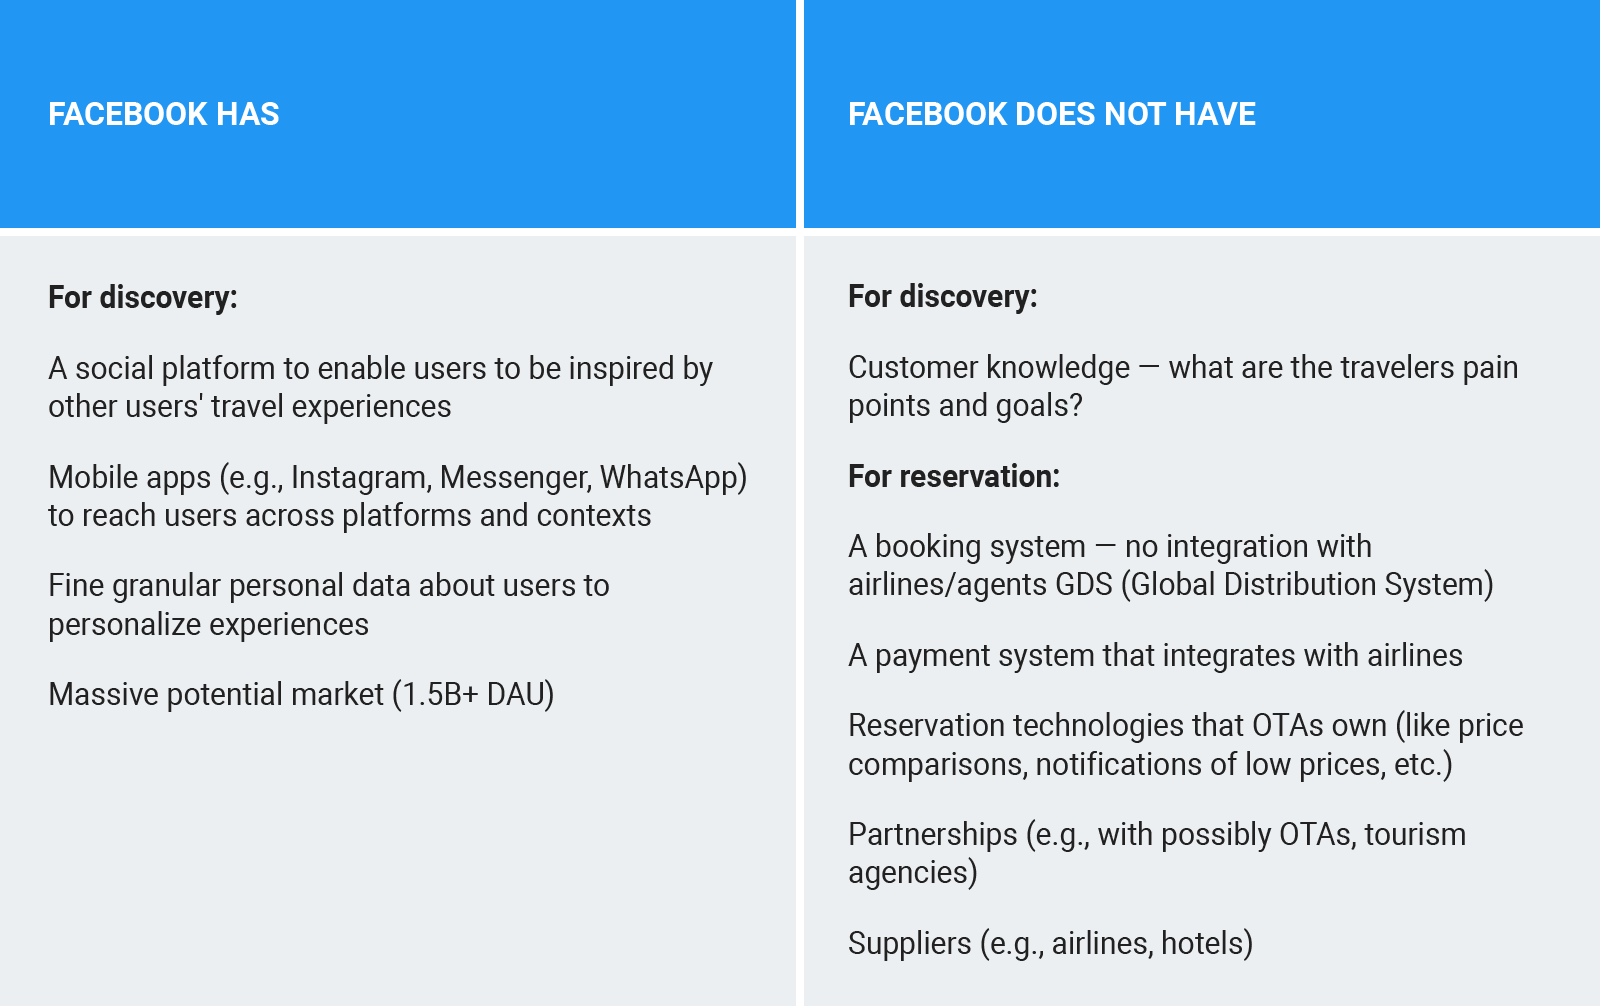 Listing the core capabilities Facebook has and does not have